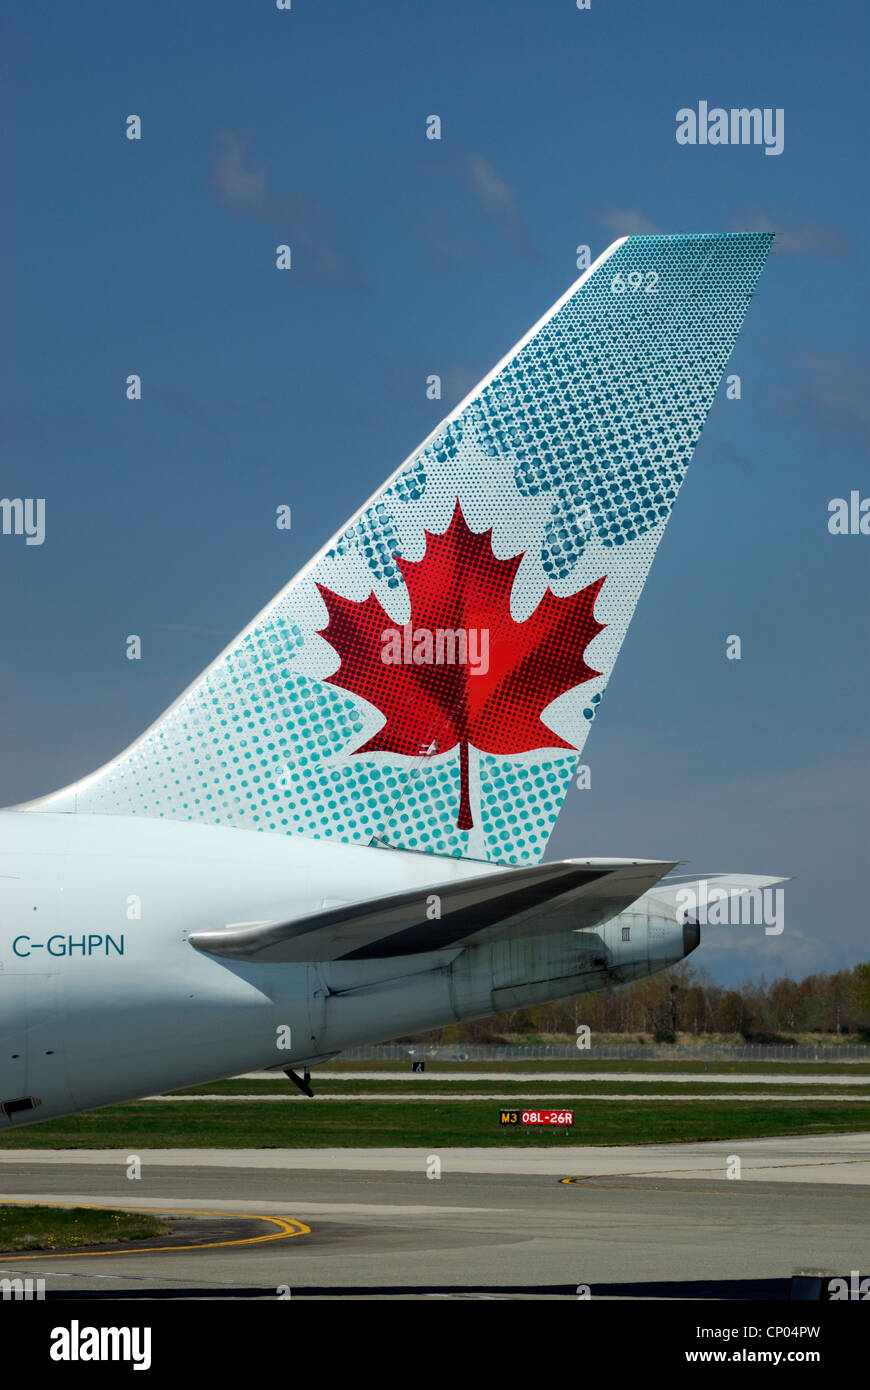 Air Canada logo on the jet tail wing of C-GHPN Boeing 767 33 A/ER. Stock Photo